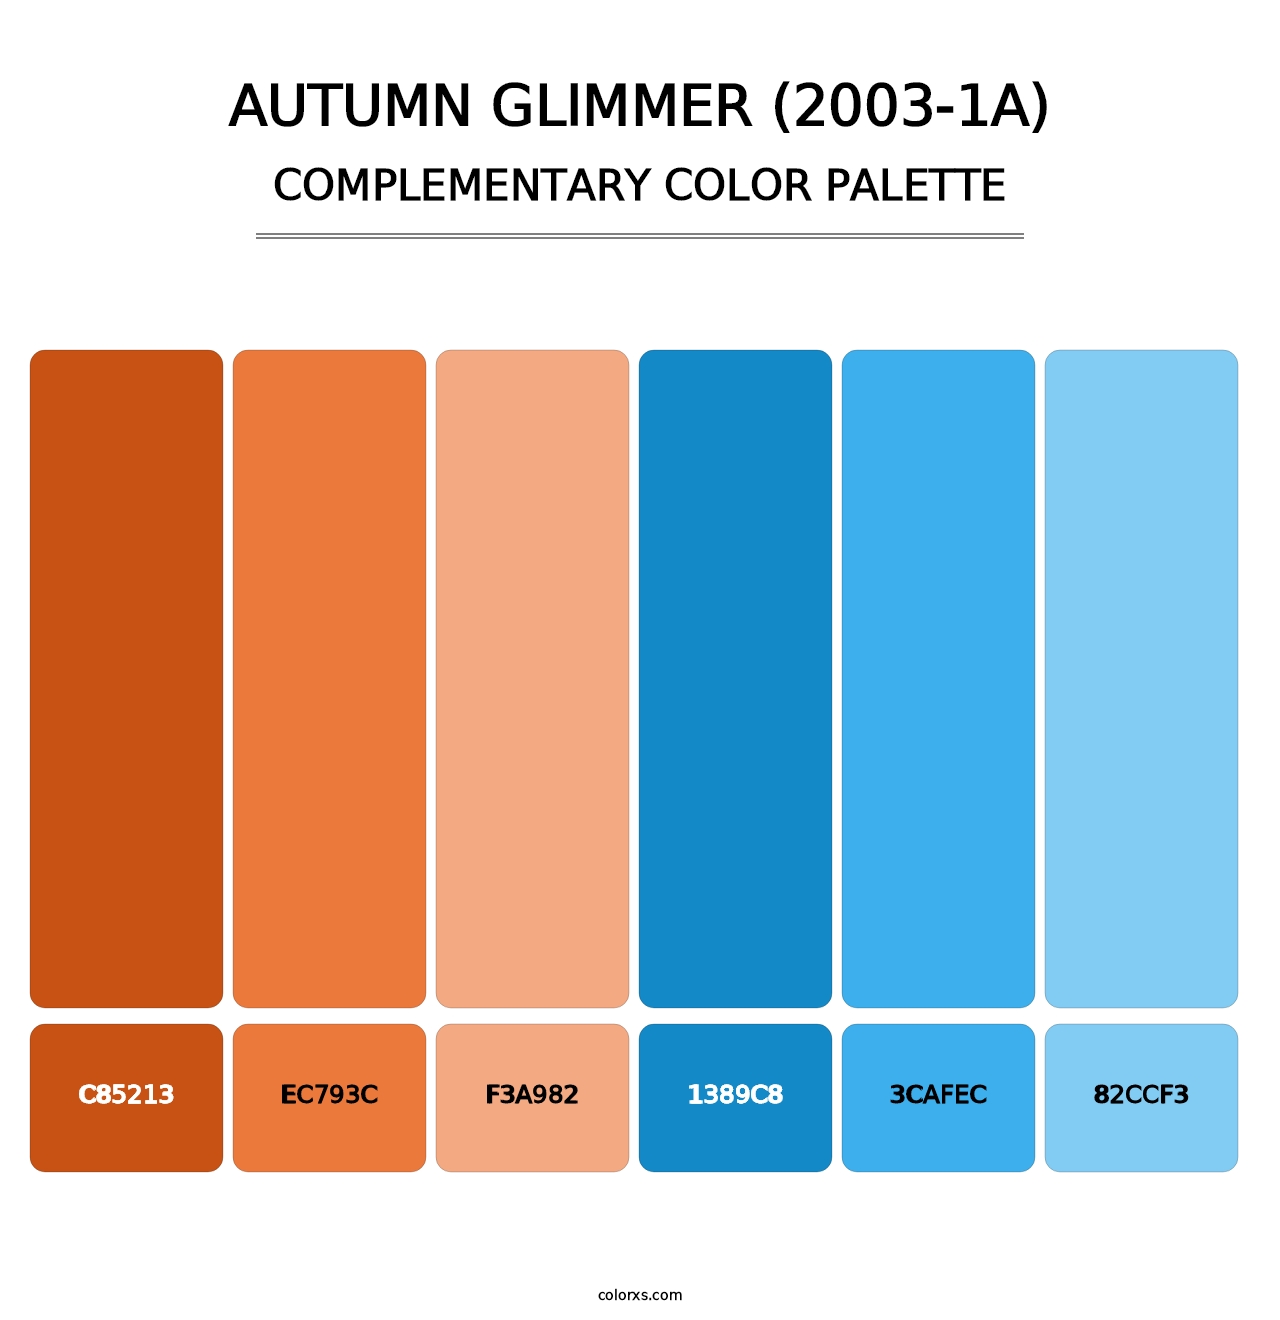 Autumn Glimmer (2003-1A) - Complementary Color Palette